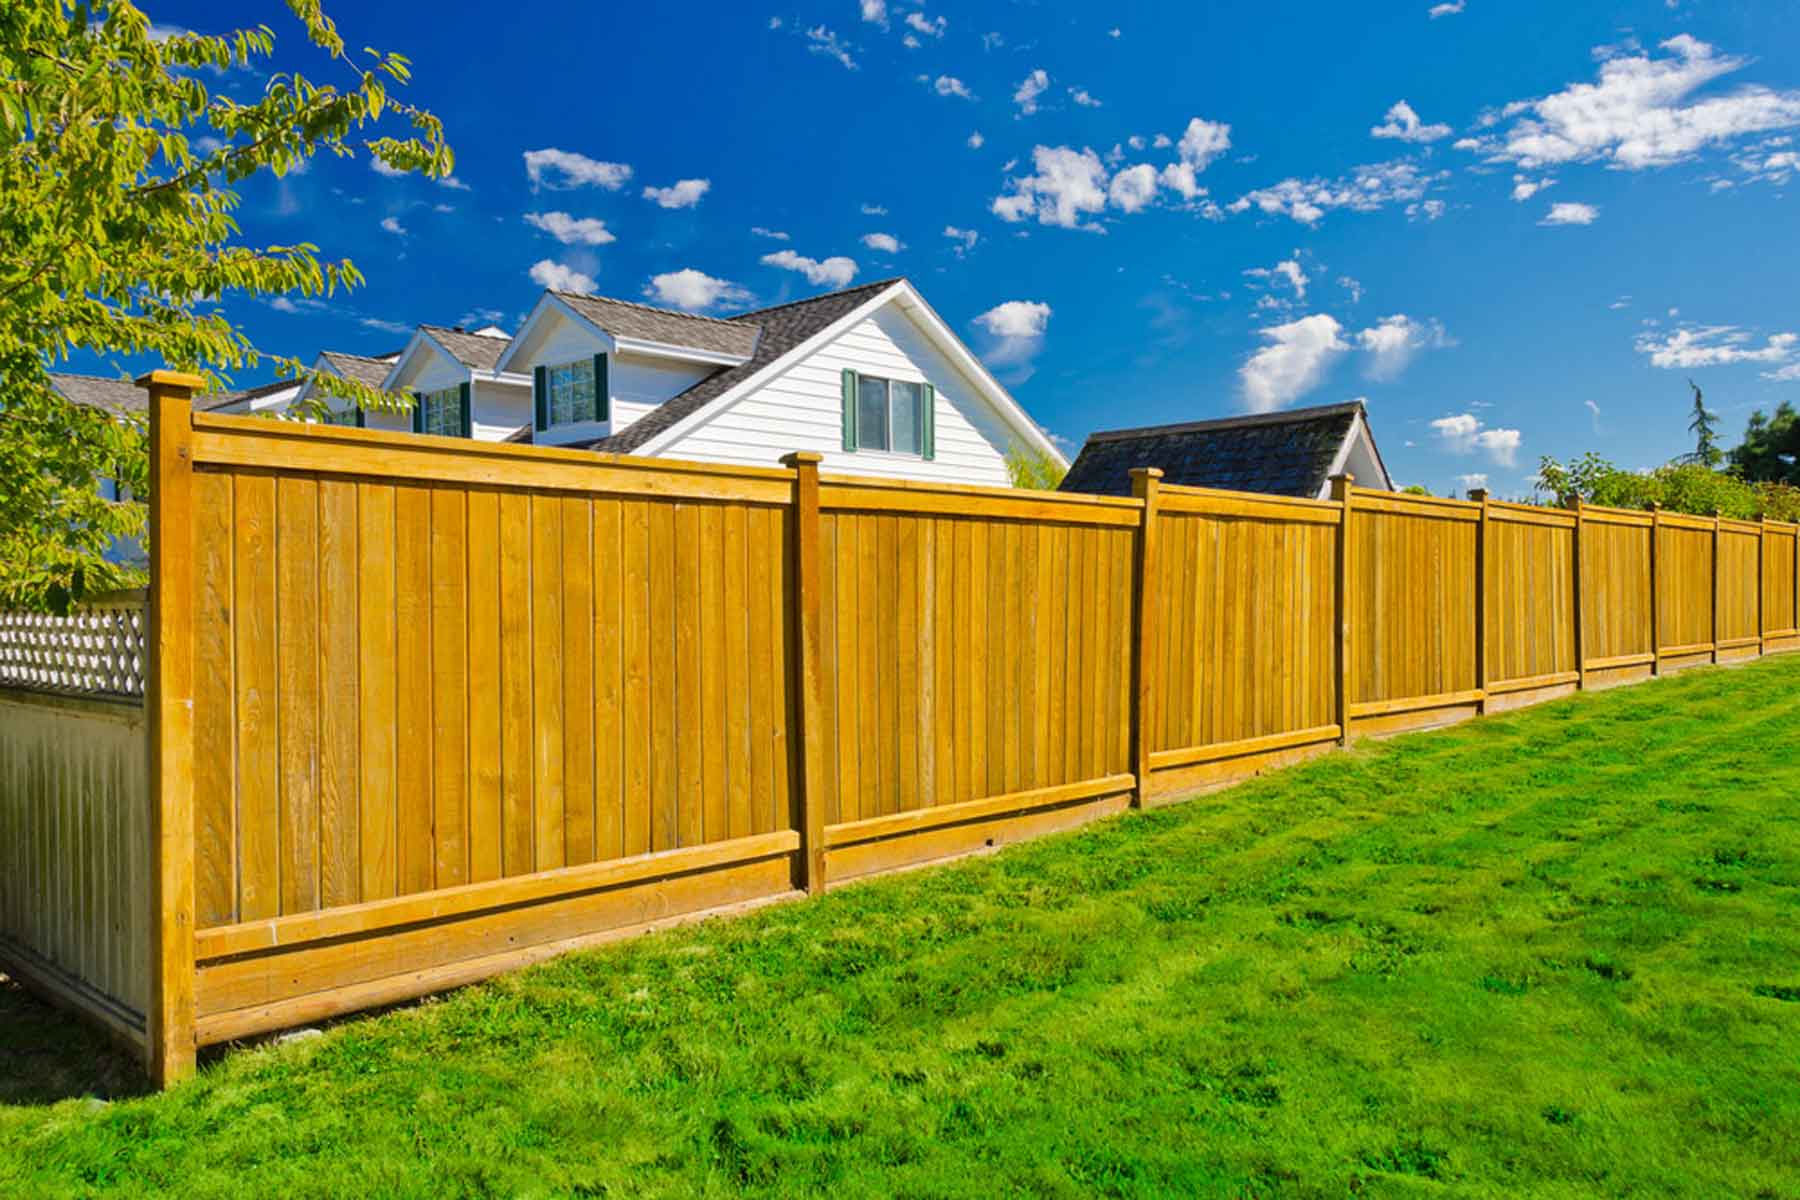 Find a privacy fence installer near you